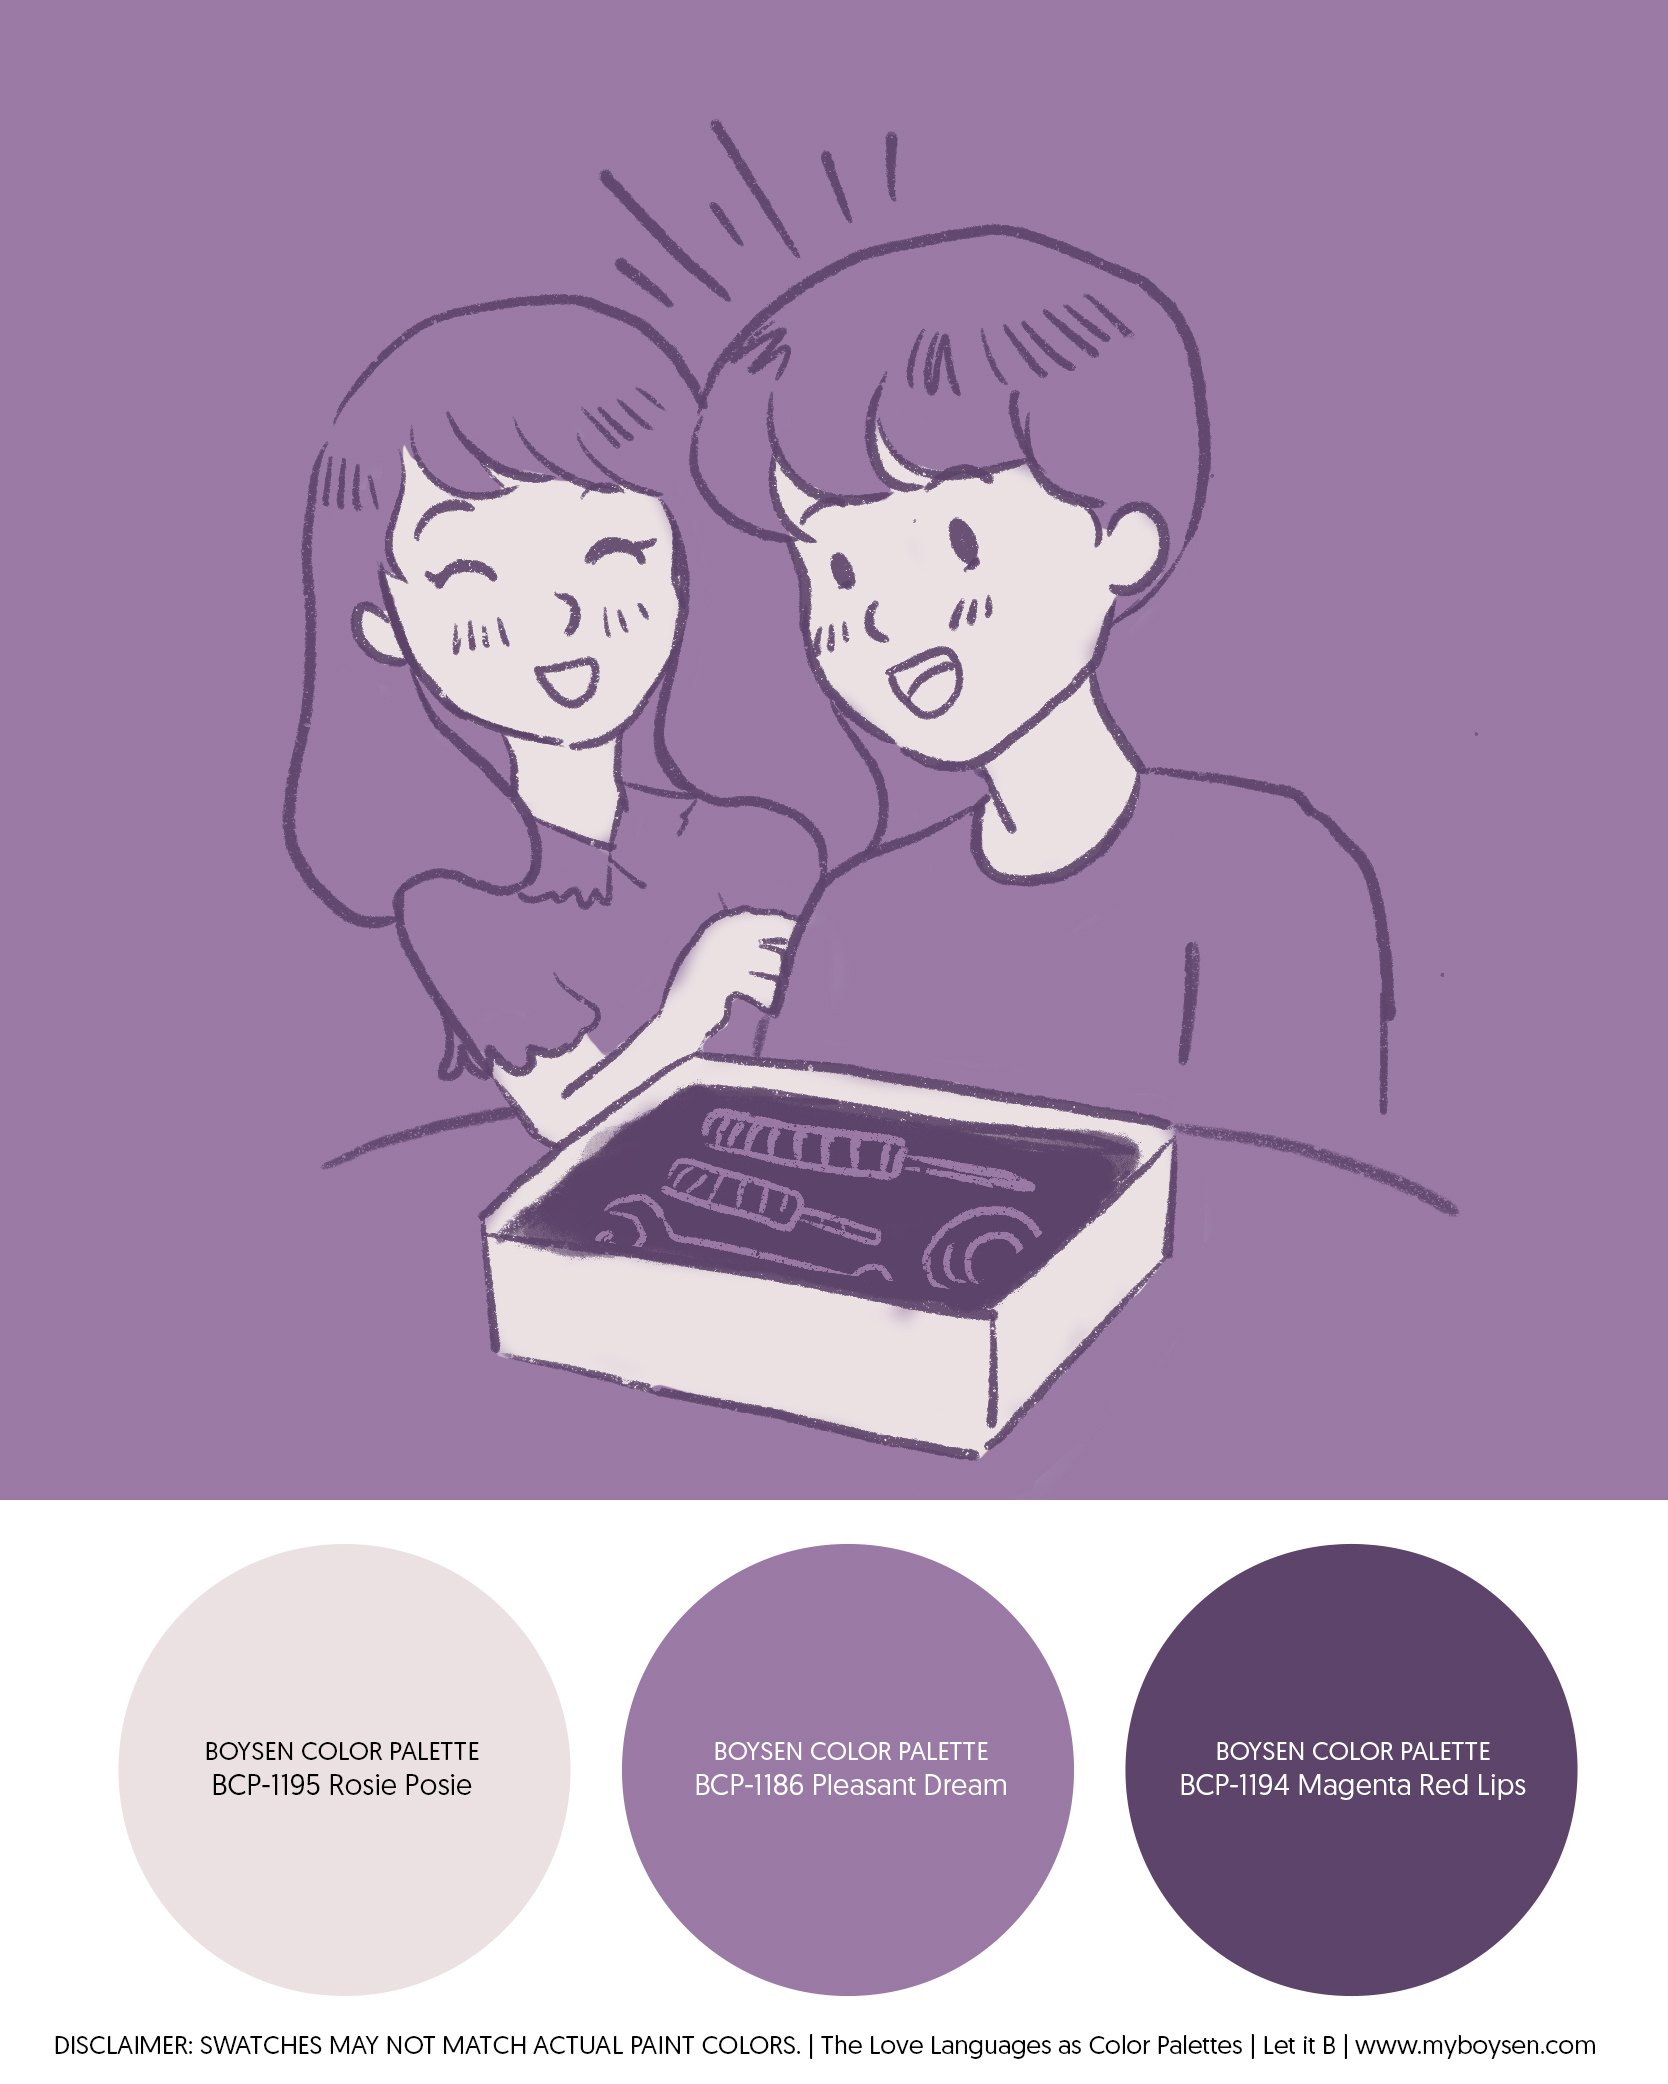 The Love Languages as Color Palettes | MyBoysen